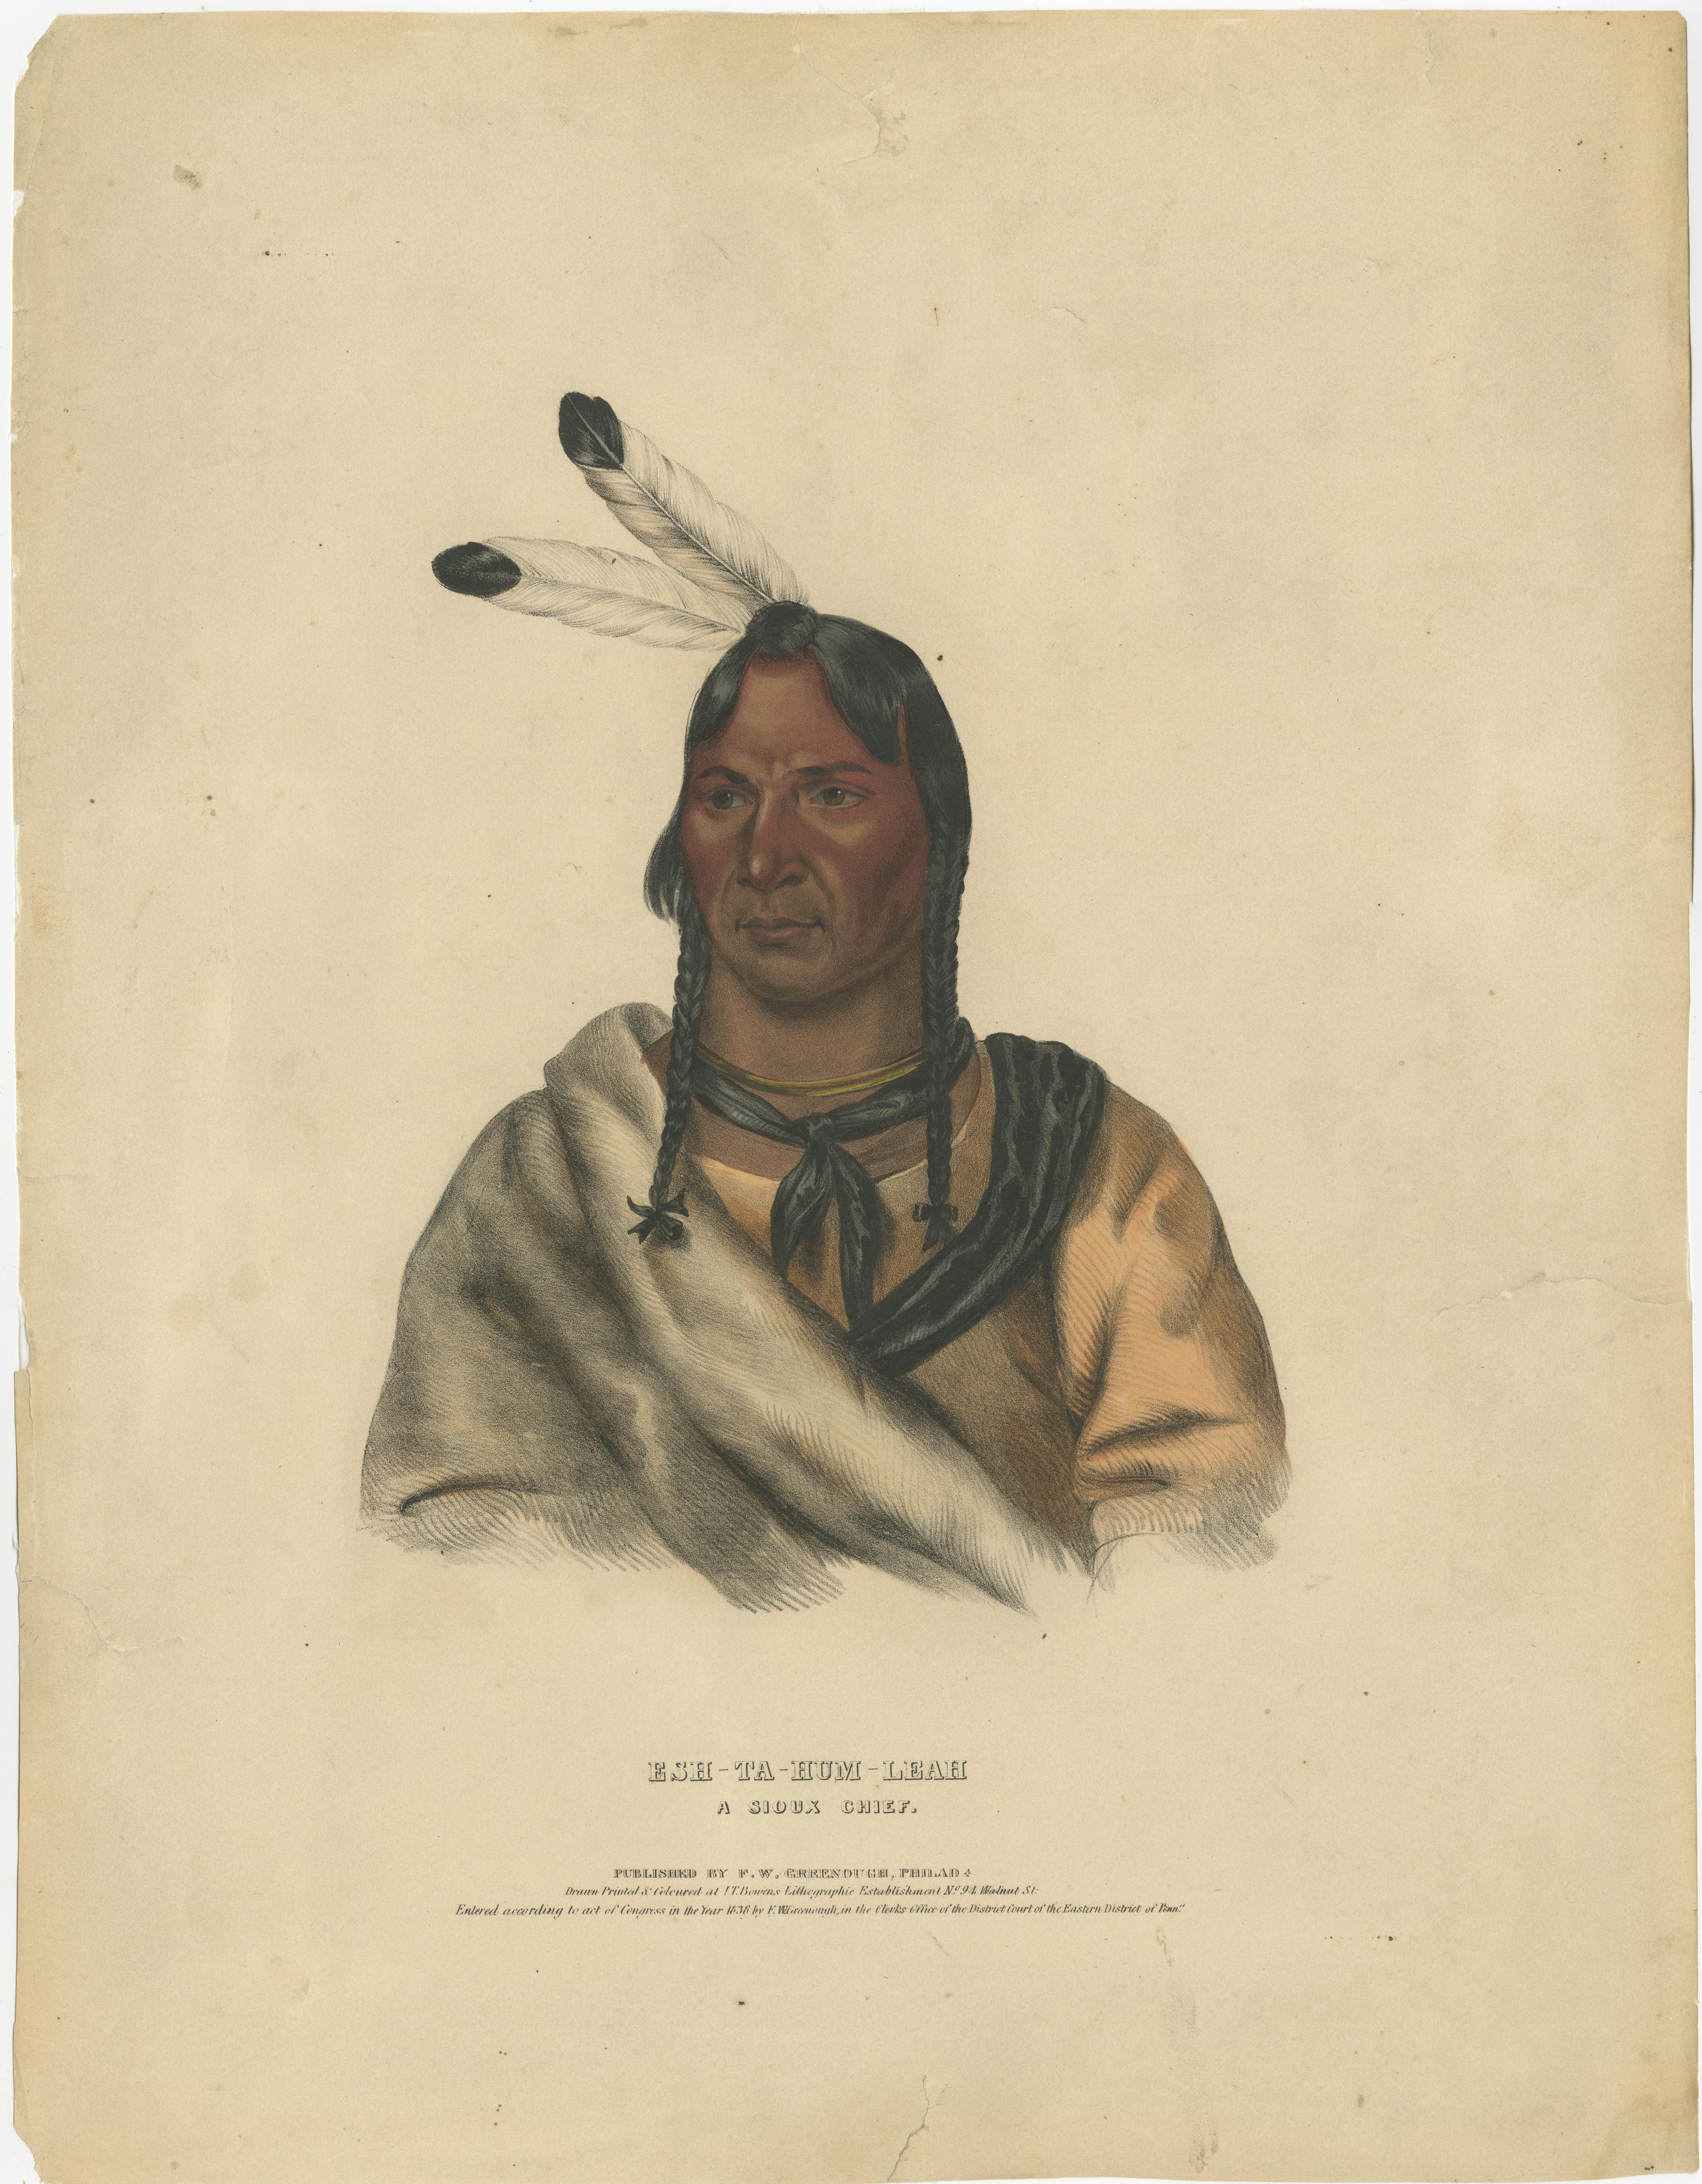 Esh-Ta-Hum-Leah: The Thoughtful Leader of the Sioux

This is a hand-colored lithograph titled 